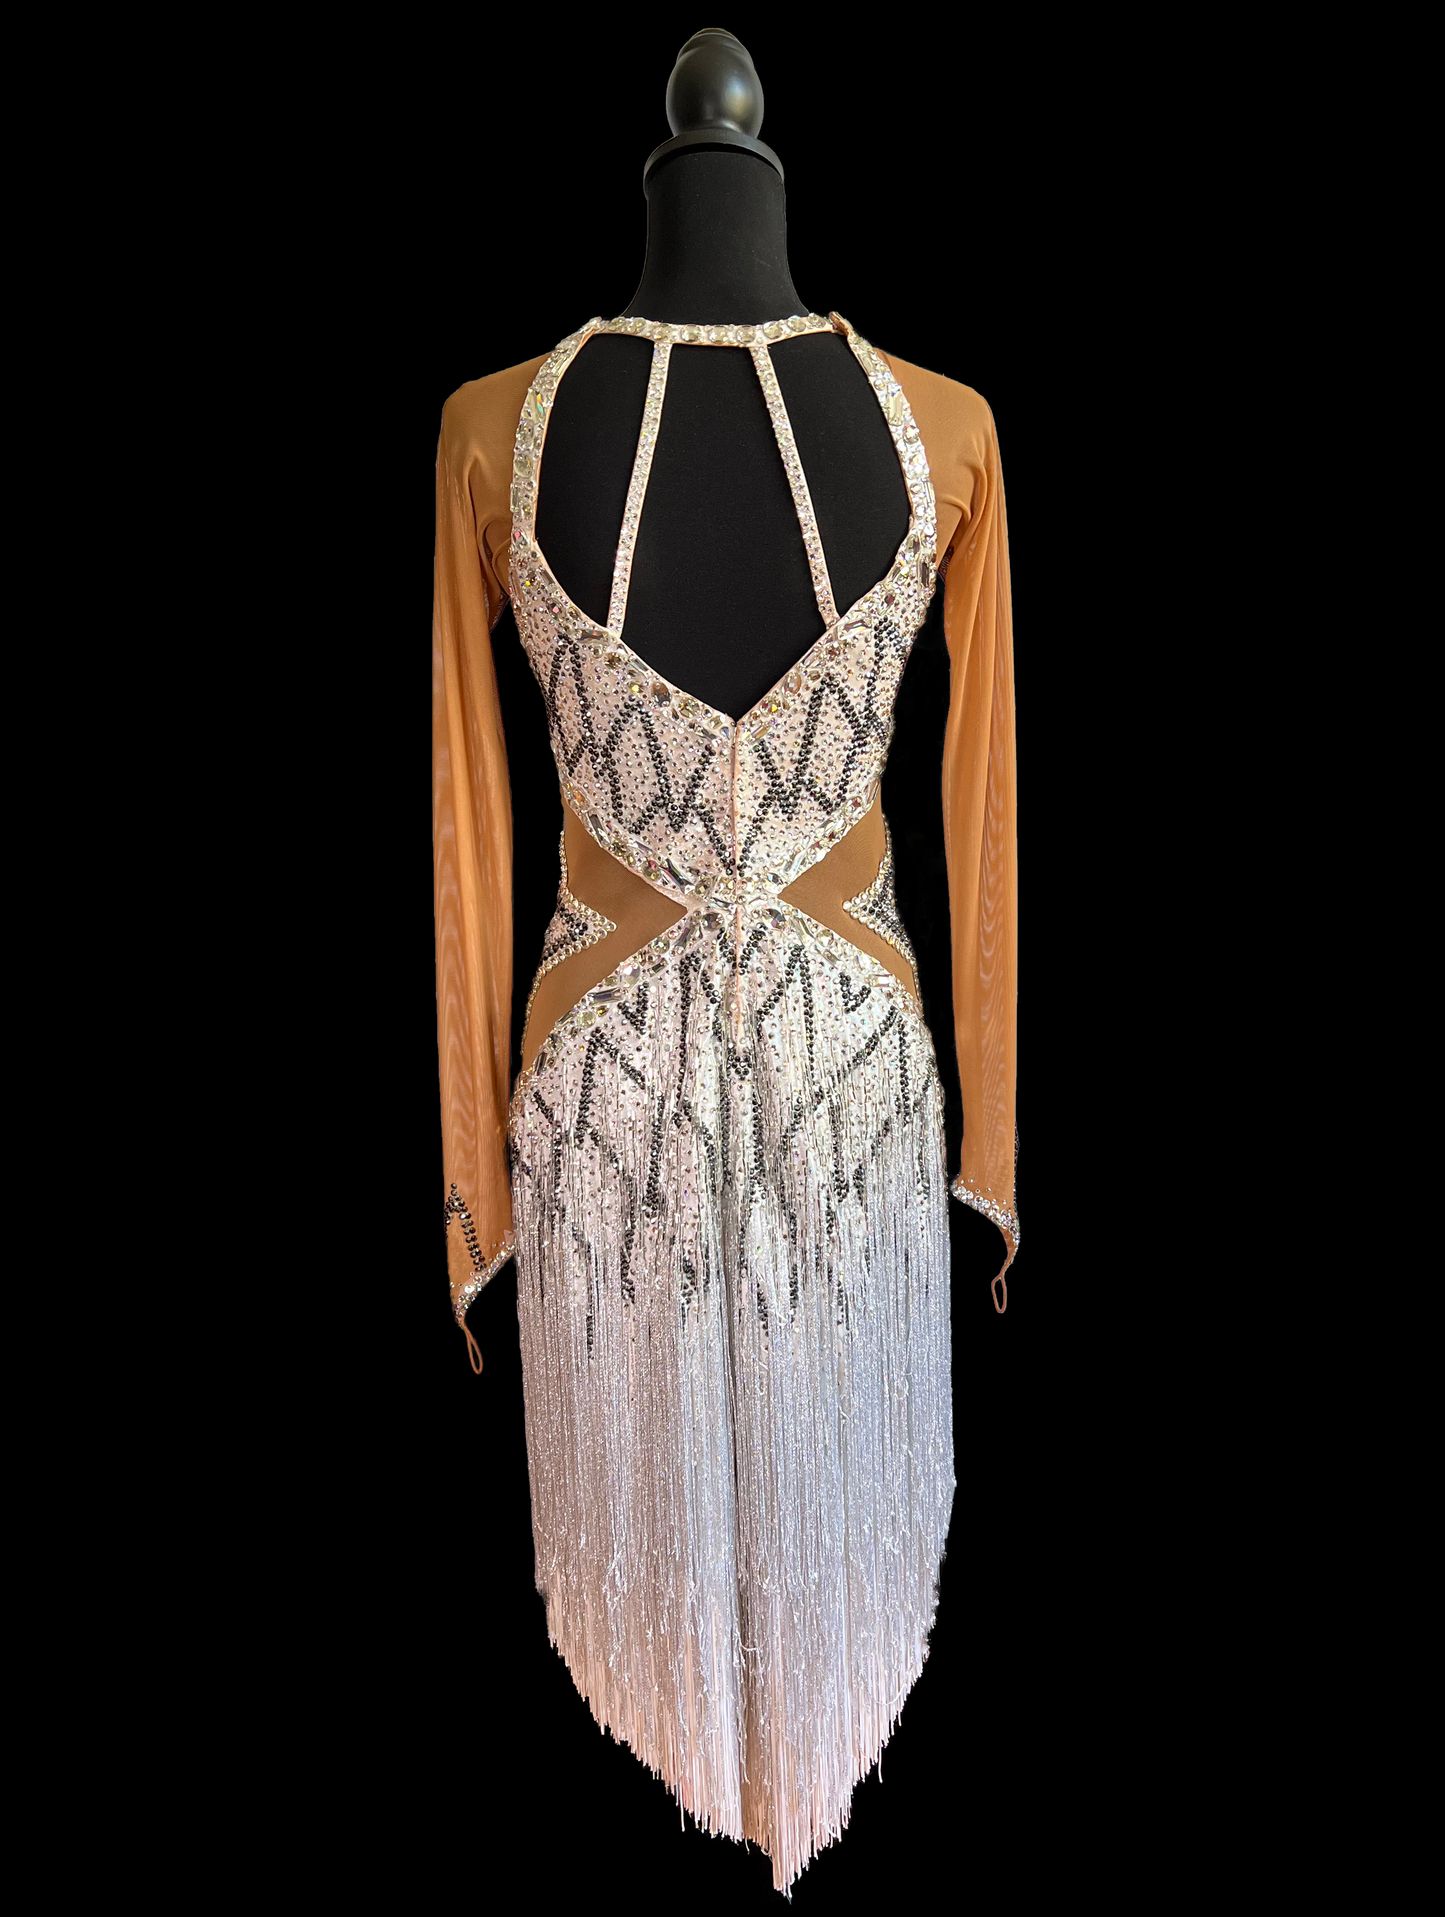 Resale Artistry in Motion Silver Latin Dress with Long Mesh Sleeves, Fringe Skirt, and Cross Straps Sz US 12-18 Lat400